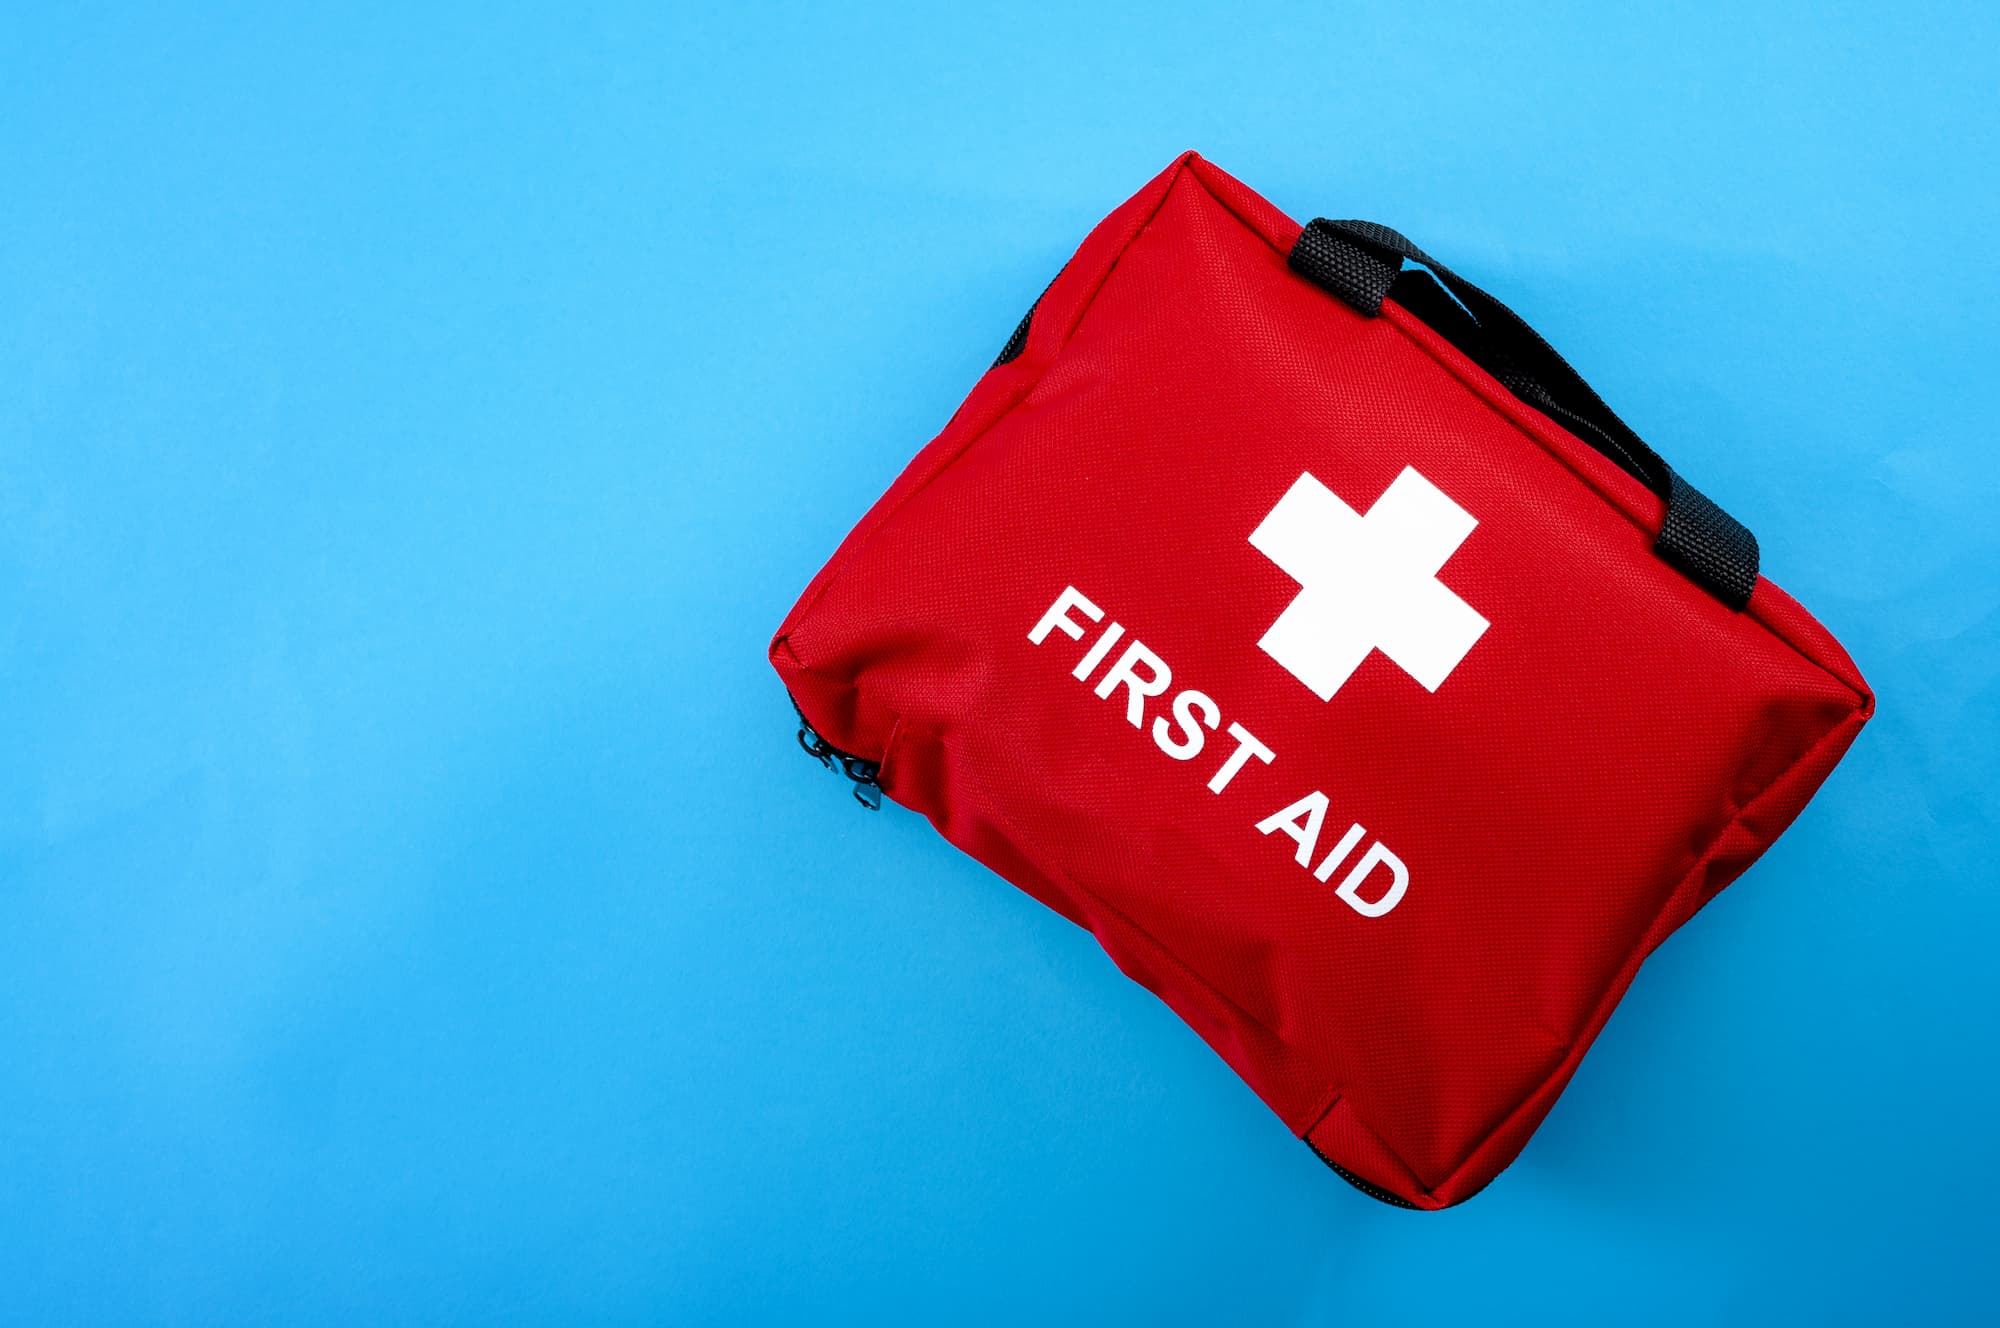 A bright red first aid bag on a blue background